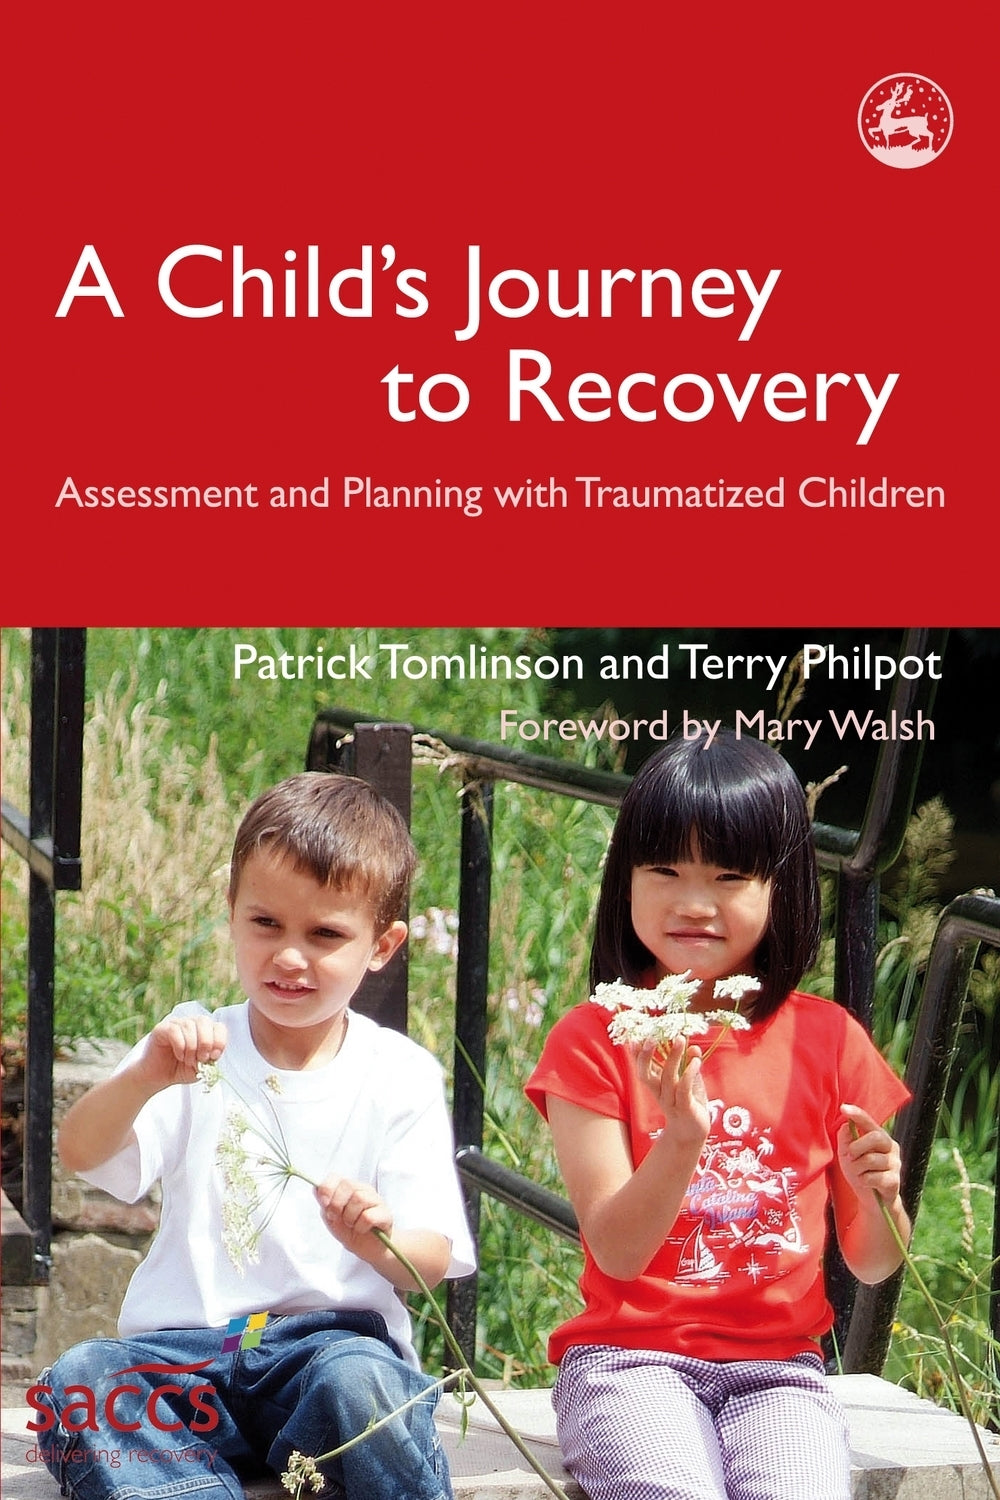 A Child's Journey to Recovery by Patrick Tomlinson, Mary Walsh, Terry Philpot